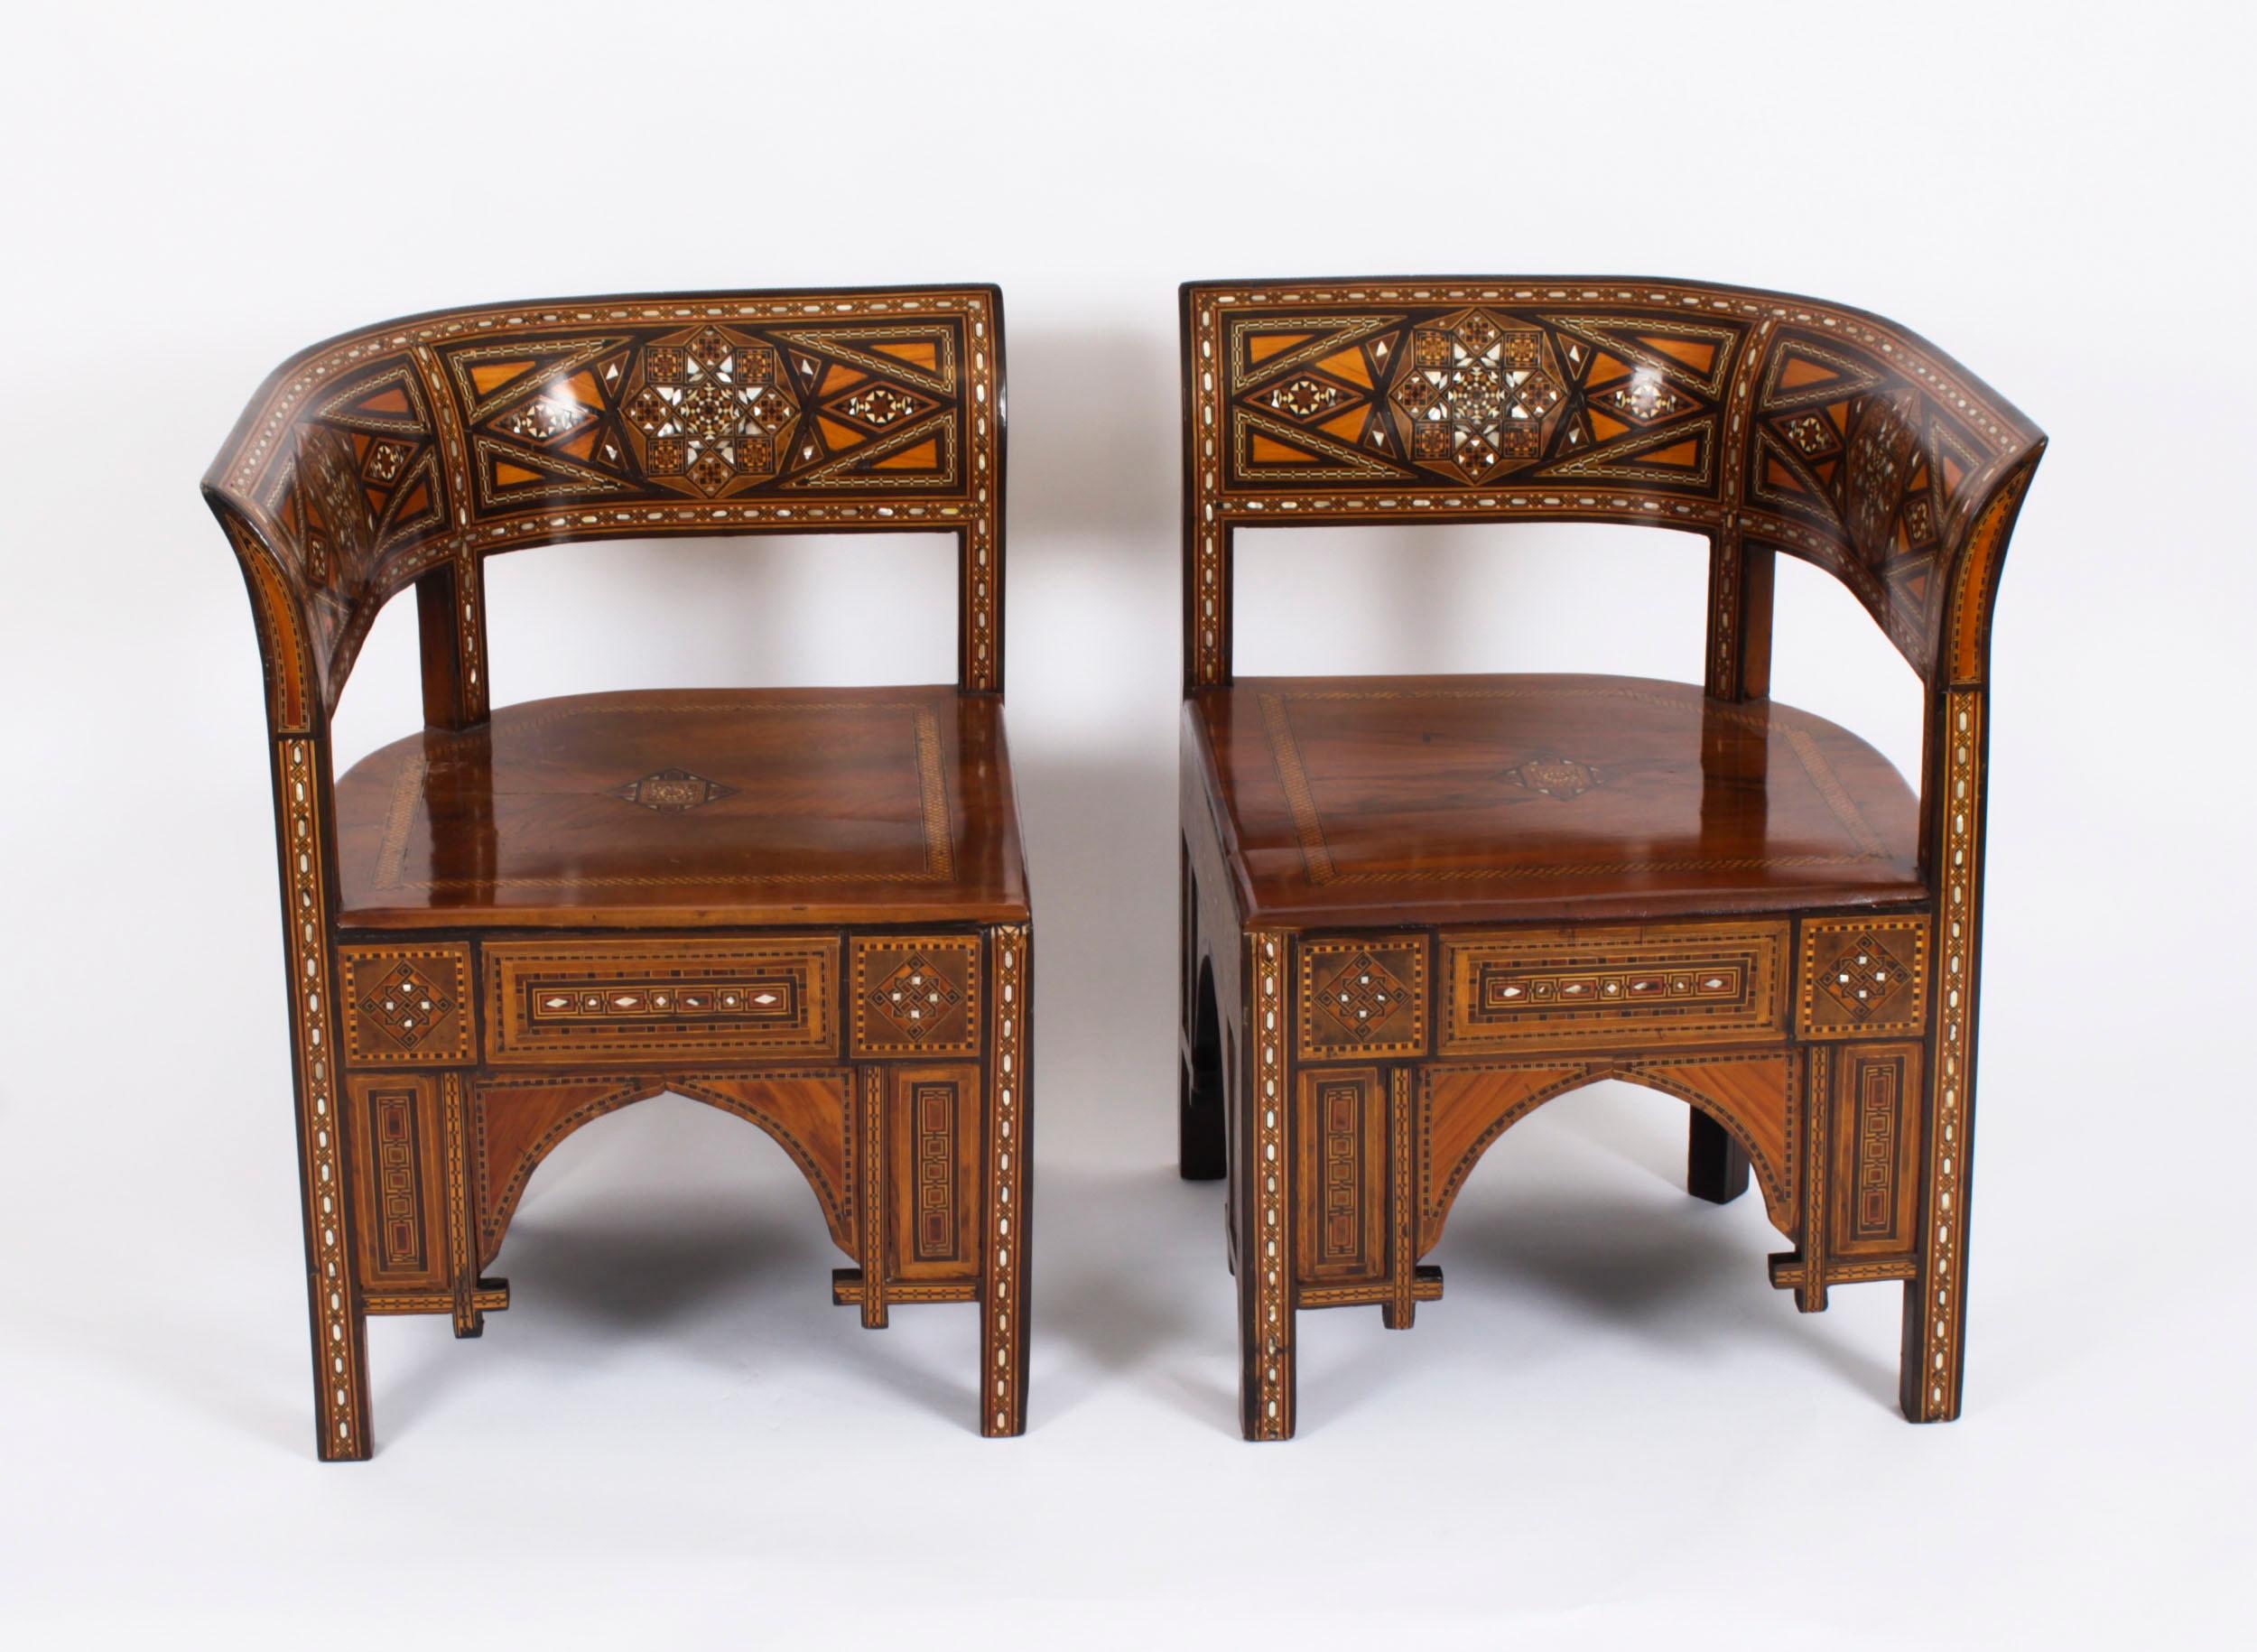 Antique Pair of Syrian Parquetry Inlaid Armchairs C1900 In Good Condition For Sale In London, GB